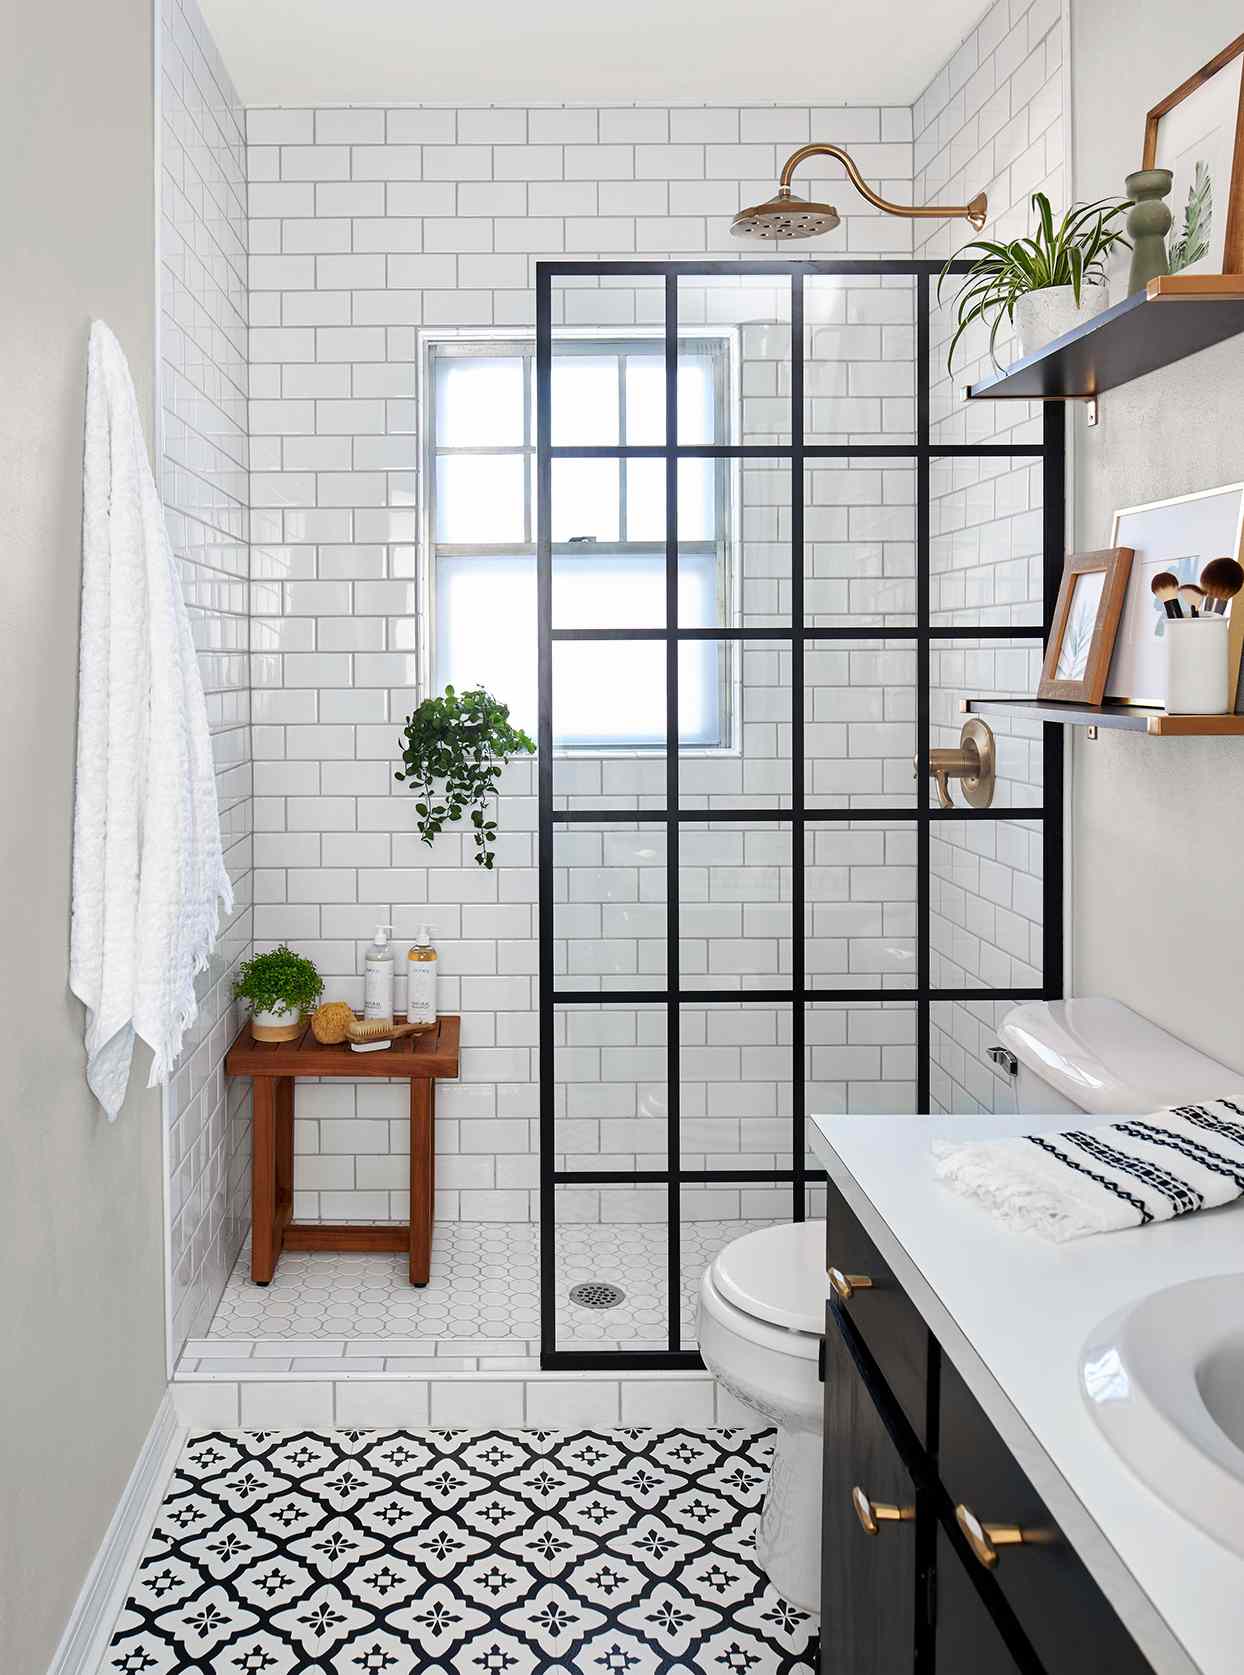 Before-and-After Small Bathroom Remodels That Showcase Stylish  Budget-Friendly Ideas | Better Homes & Gardens